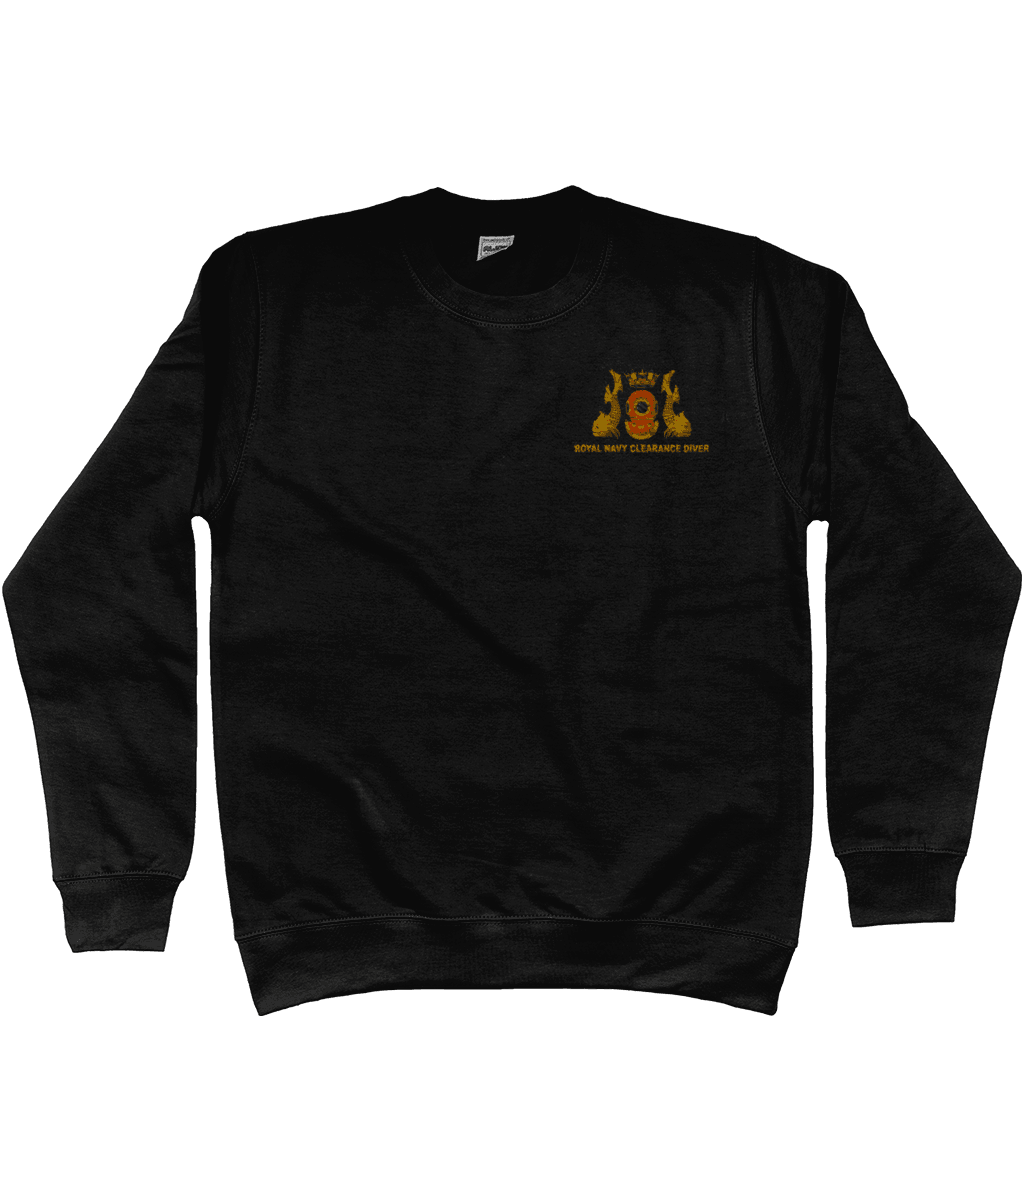 Royal Navy Clearance Diver - Embroidered AWDis Sweatshirt - Divers Gifts